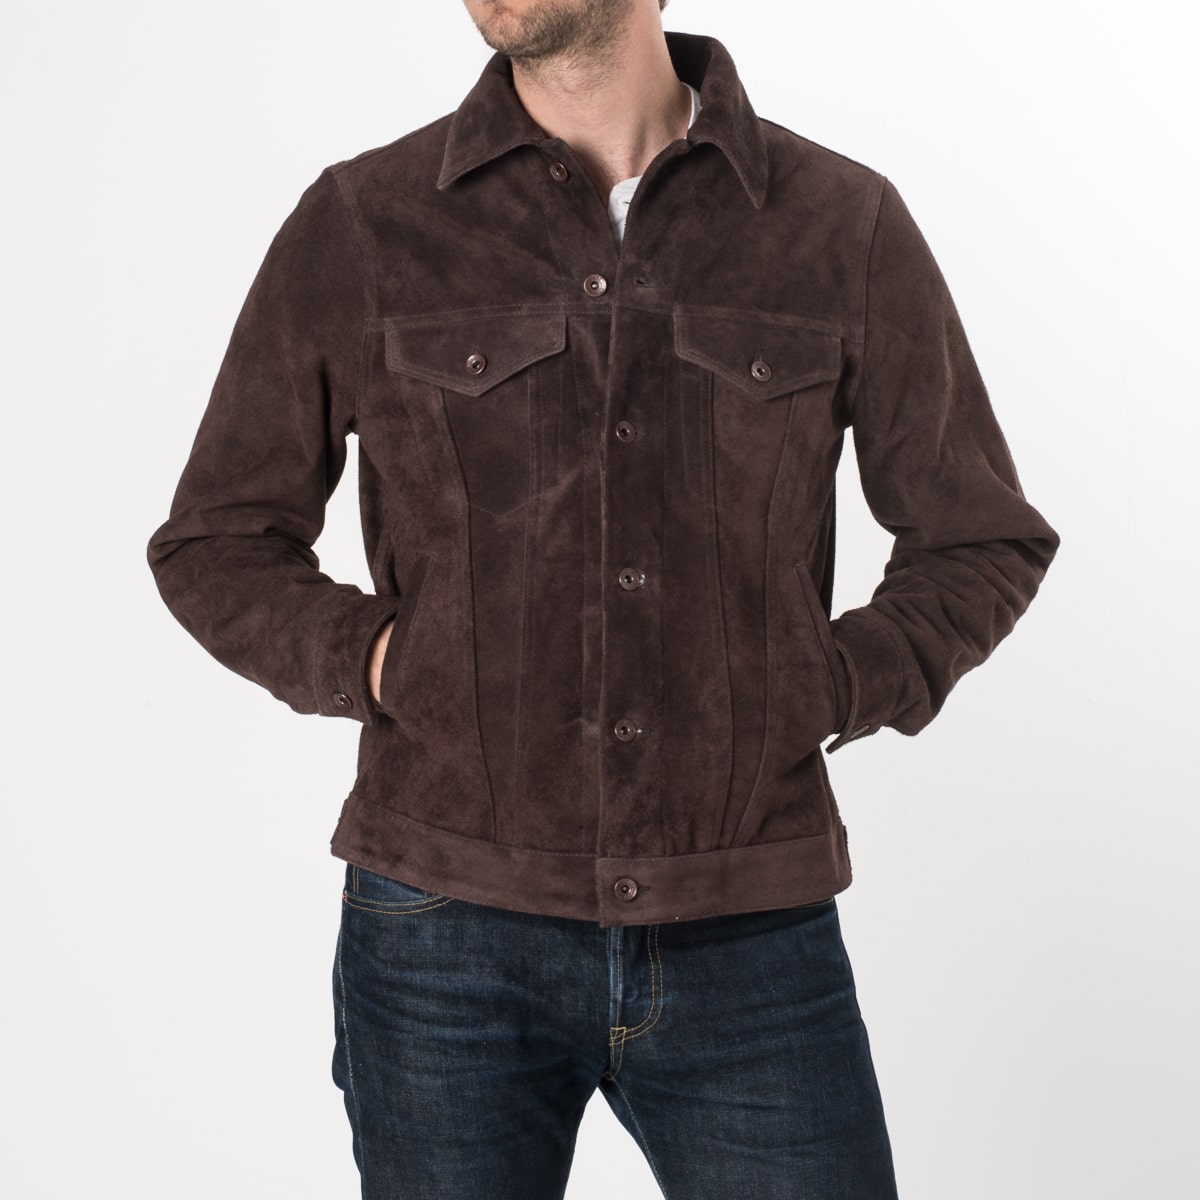 Leather Trucker Levi's / Lee / Type-whatever jackets! | Page 2 | The ...